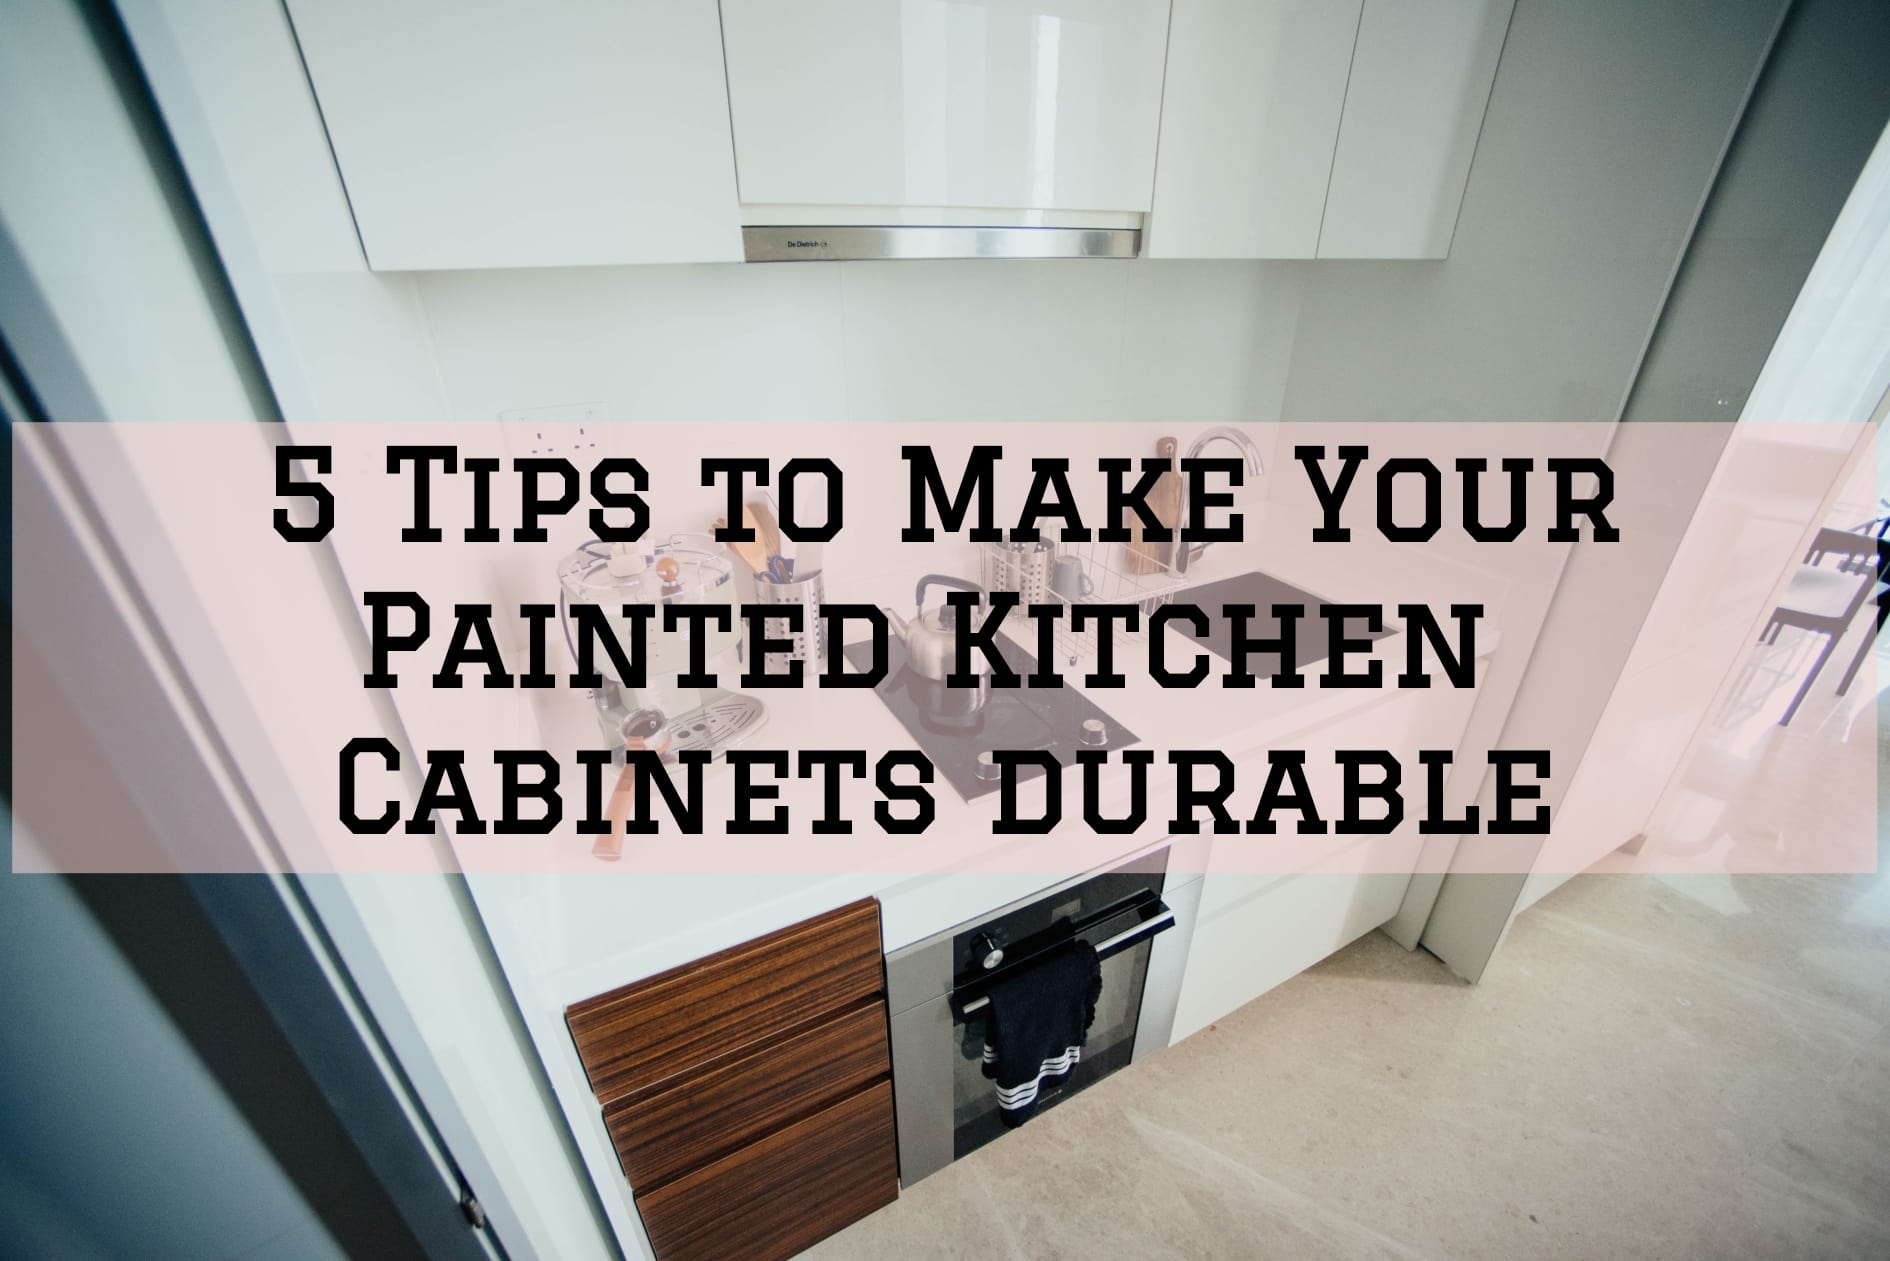 painting kitchen cabinets, repainting kitchen cabinets, kitchen cabinet repainting